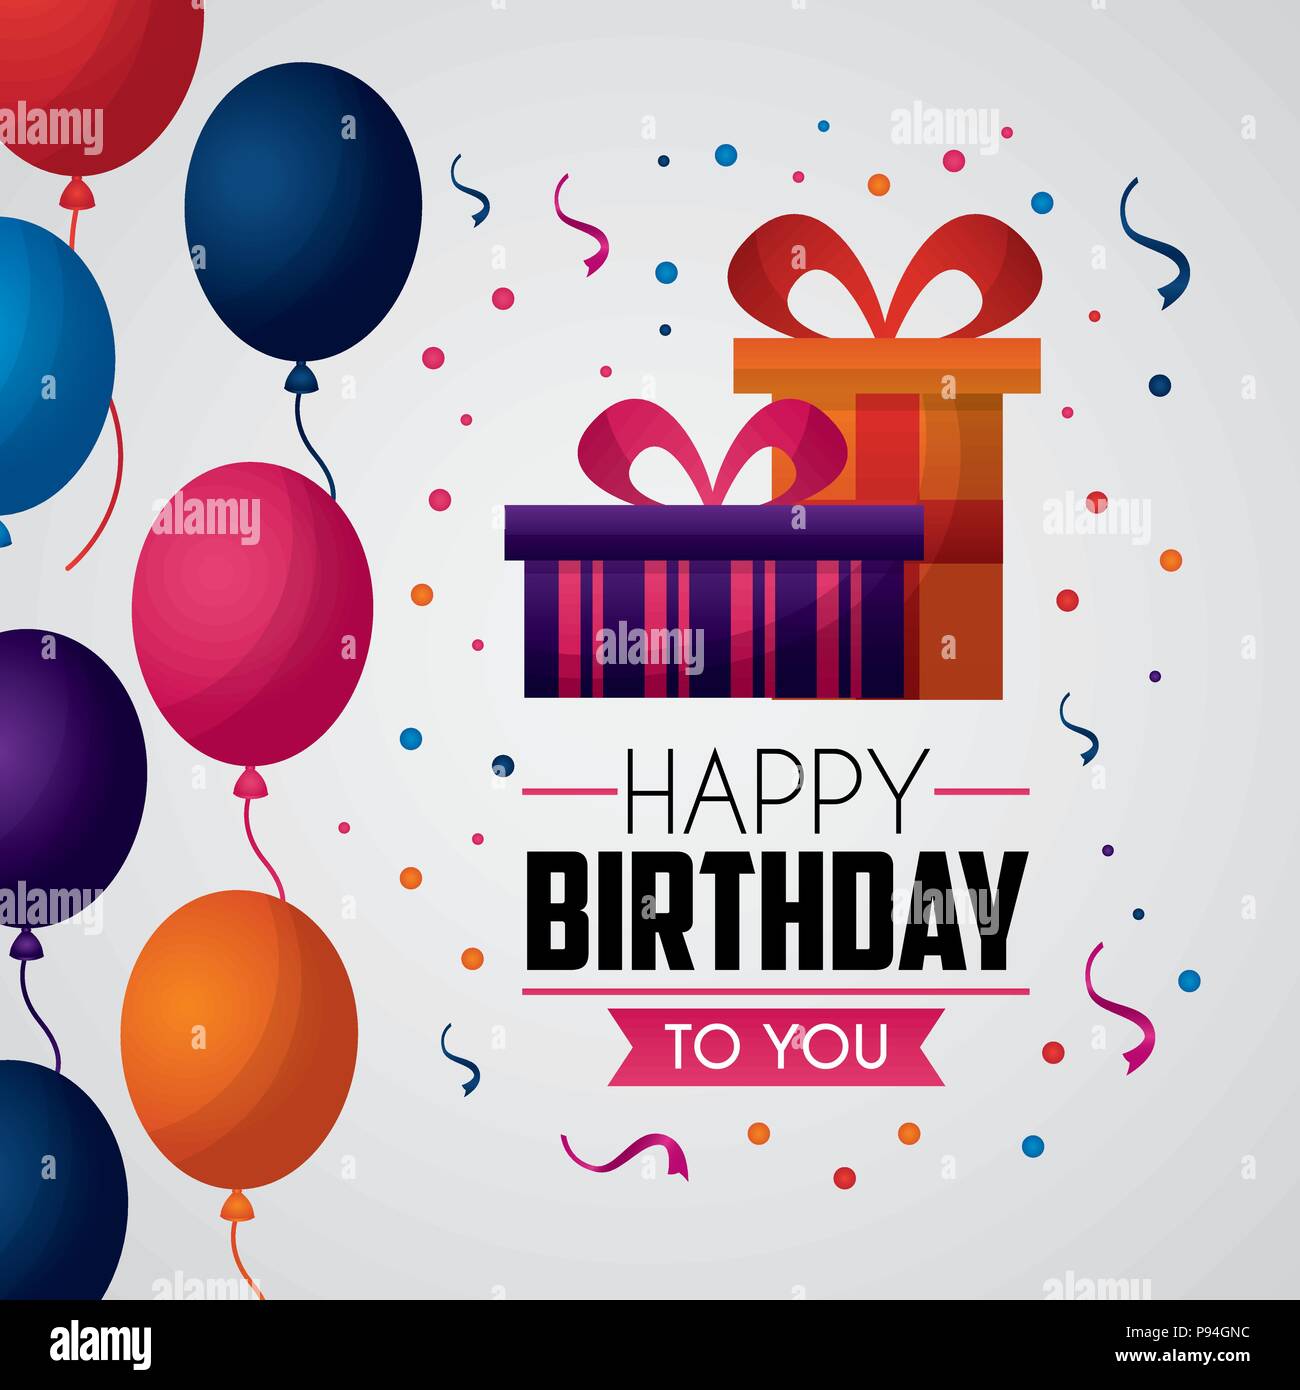 happy birthday card balloons serpentines ribbon sign gift boxes vector ...